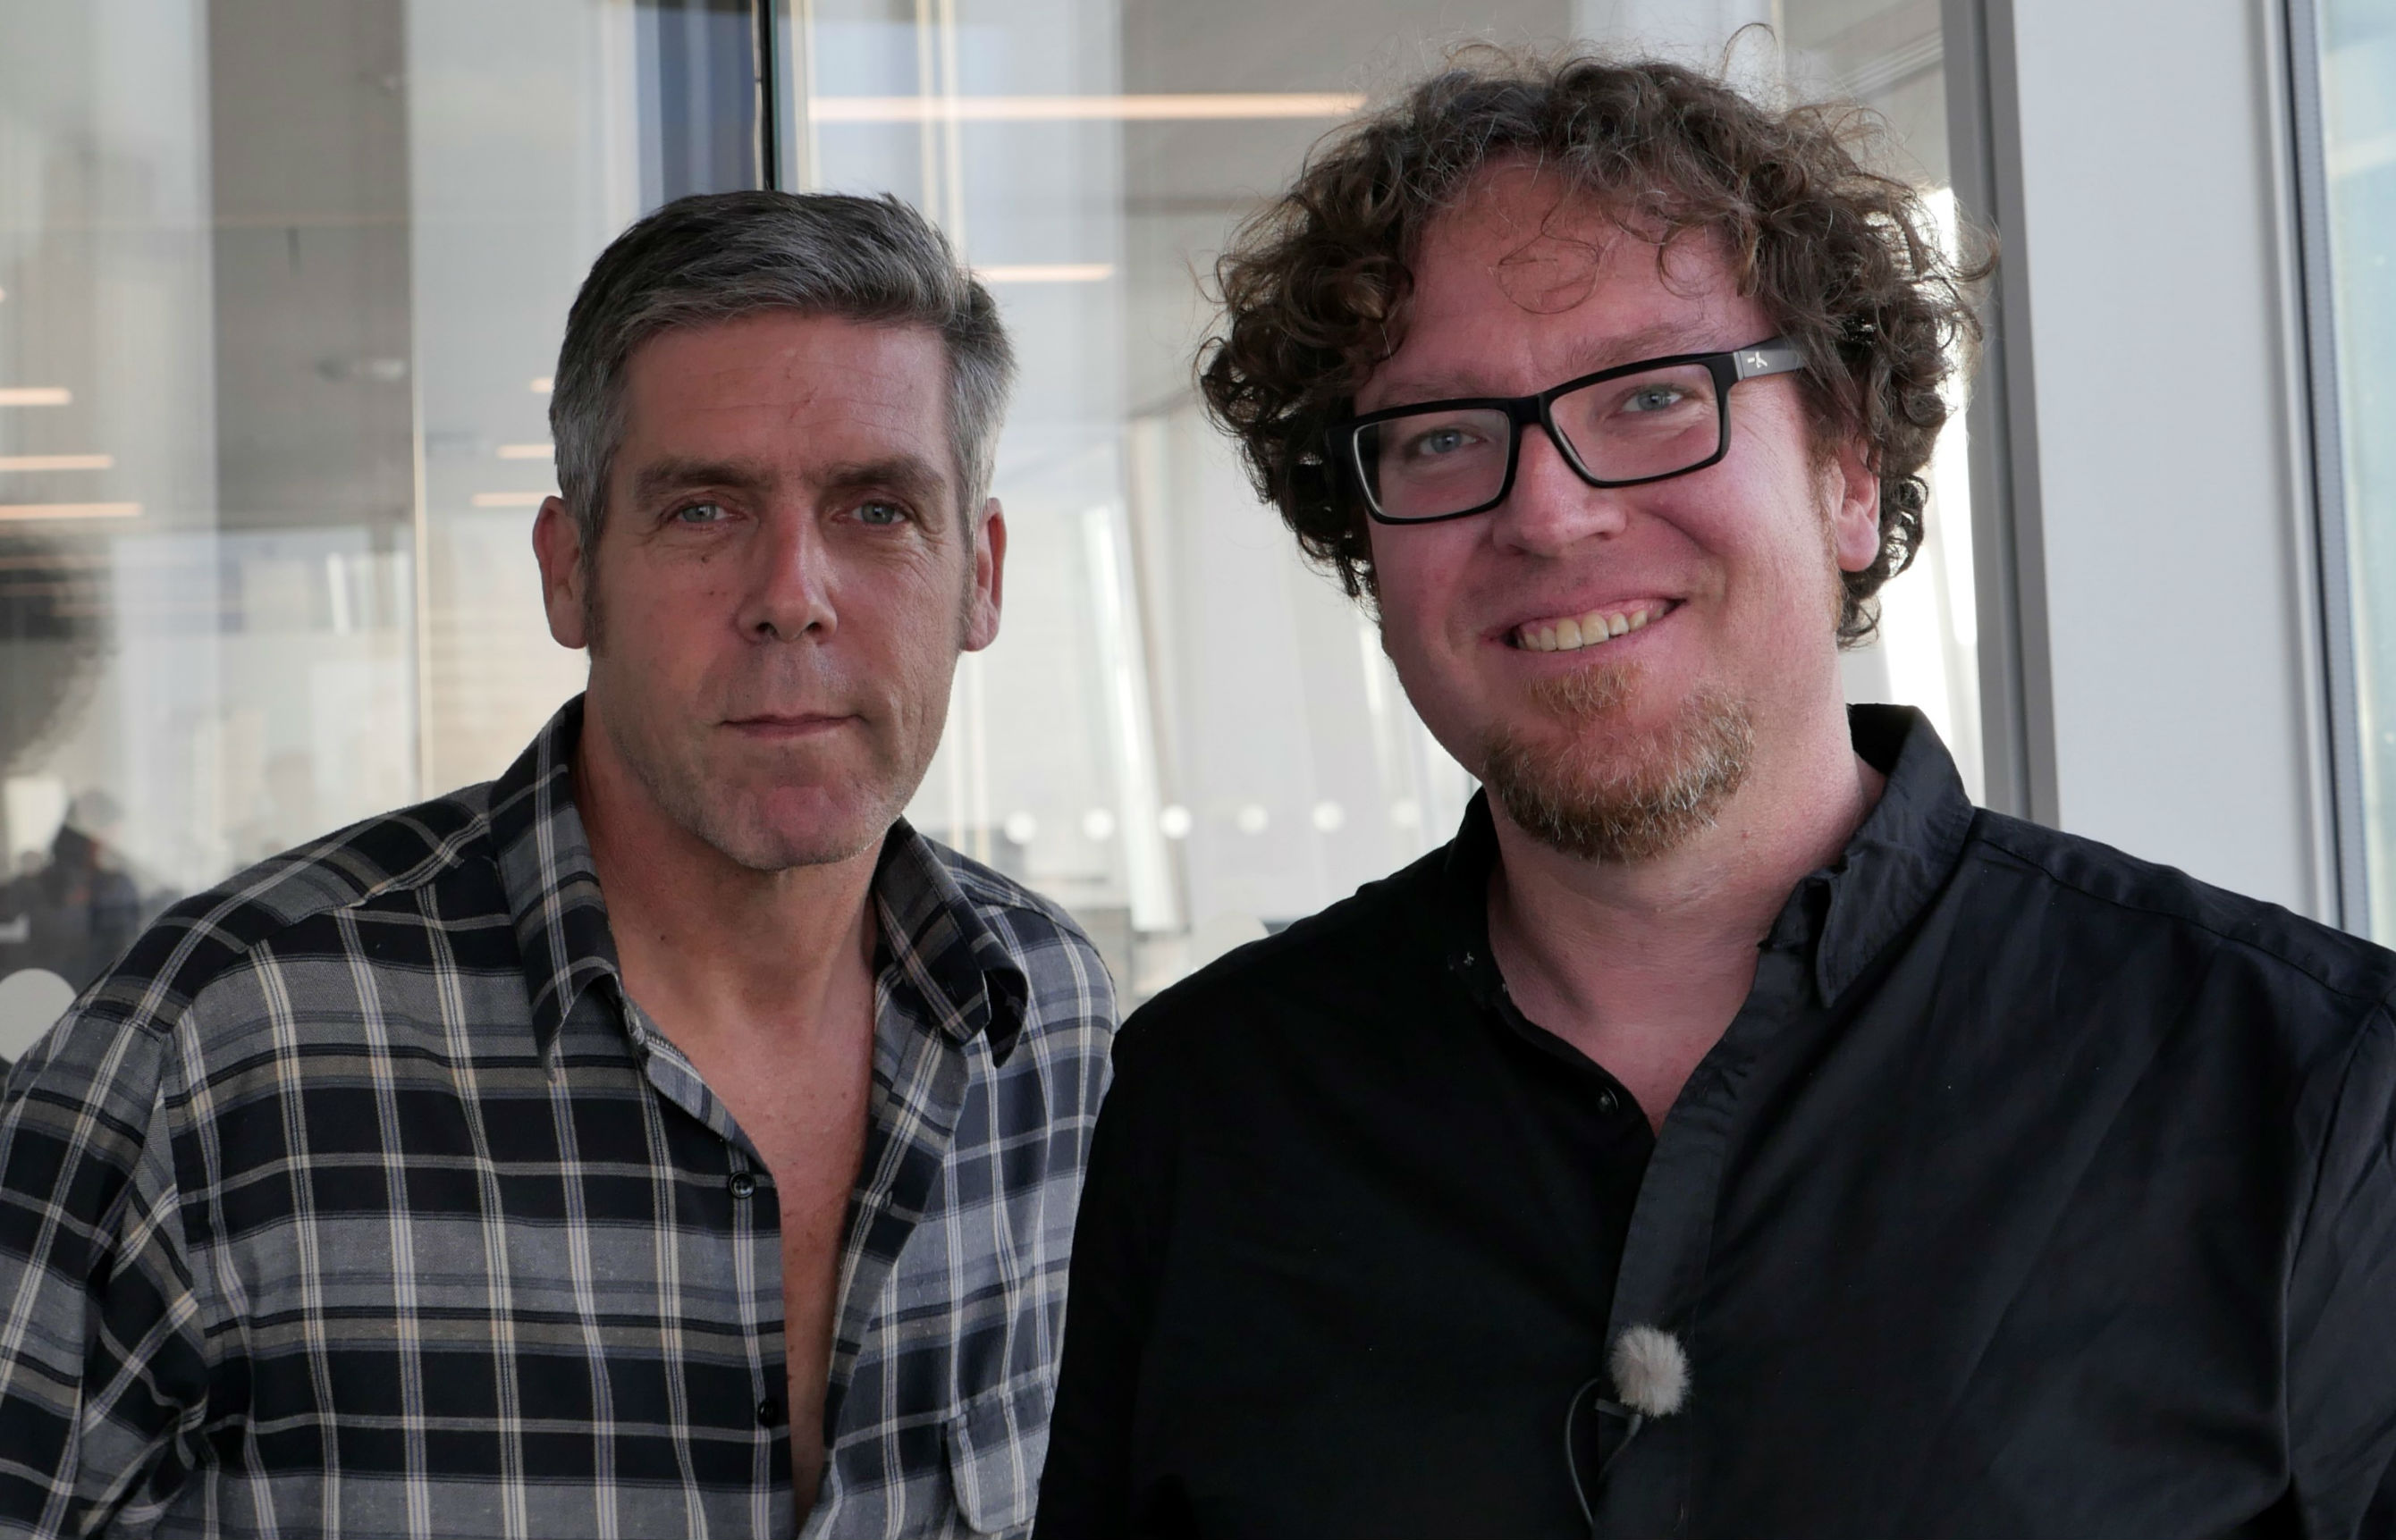 Dr Seb Kaempf (right) with Richard Gizbert, creator of The Listening Post, Al Jazeera’s weekly media critique and analysis show - one of many people Dr Kaempf interviewed in developing the course.